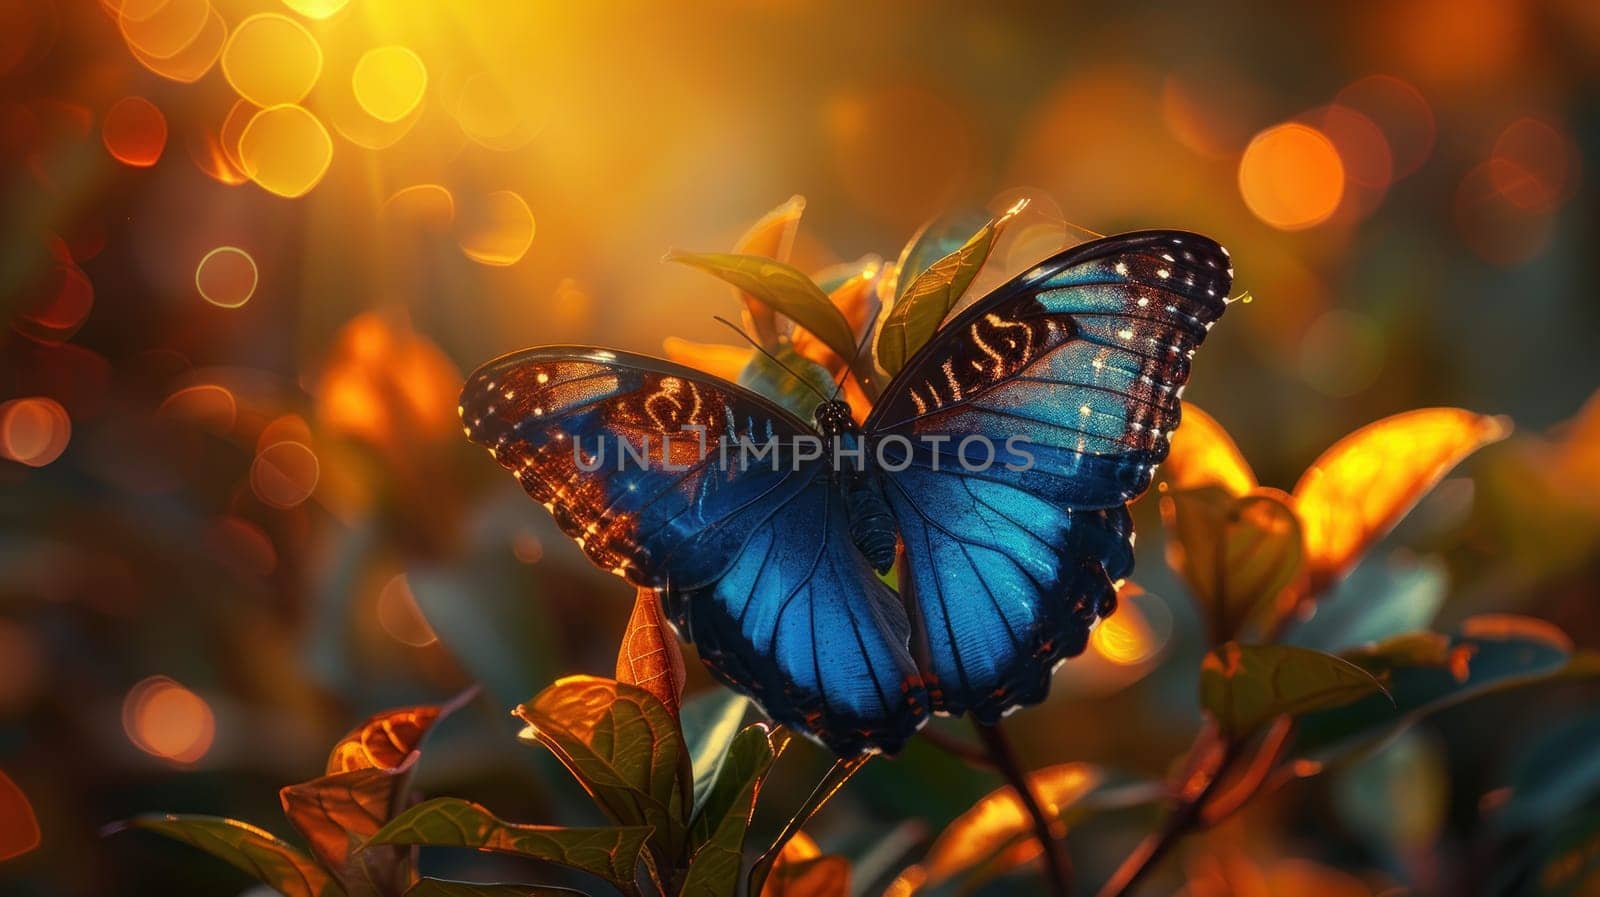 A butterfly is sitting on a leaf in a field of yellow flowers. The butterfly is blue and has a bright, cheerful appearance. The scene is peaceful and serene